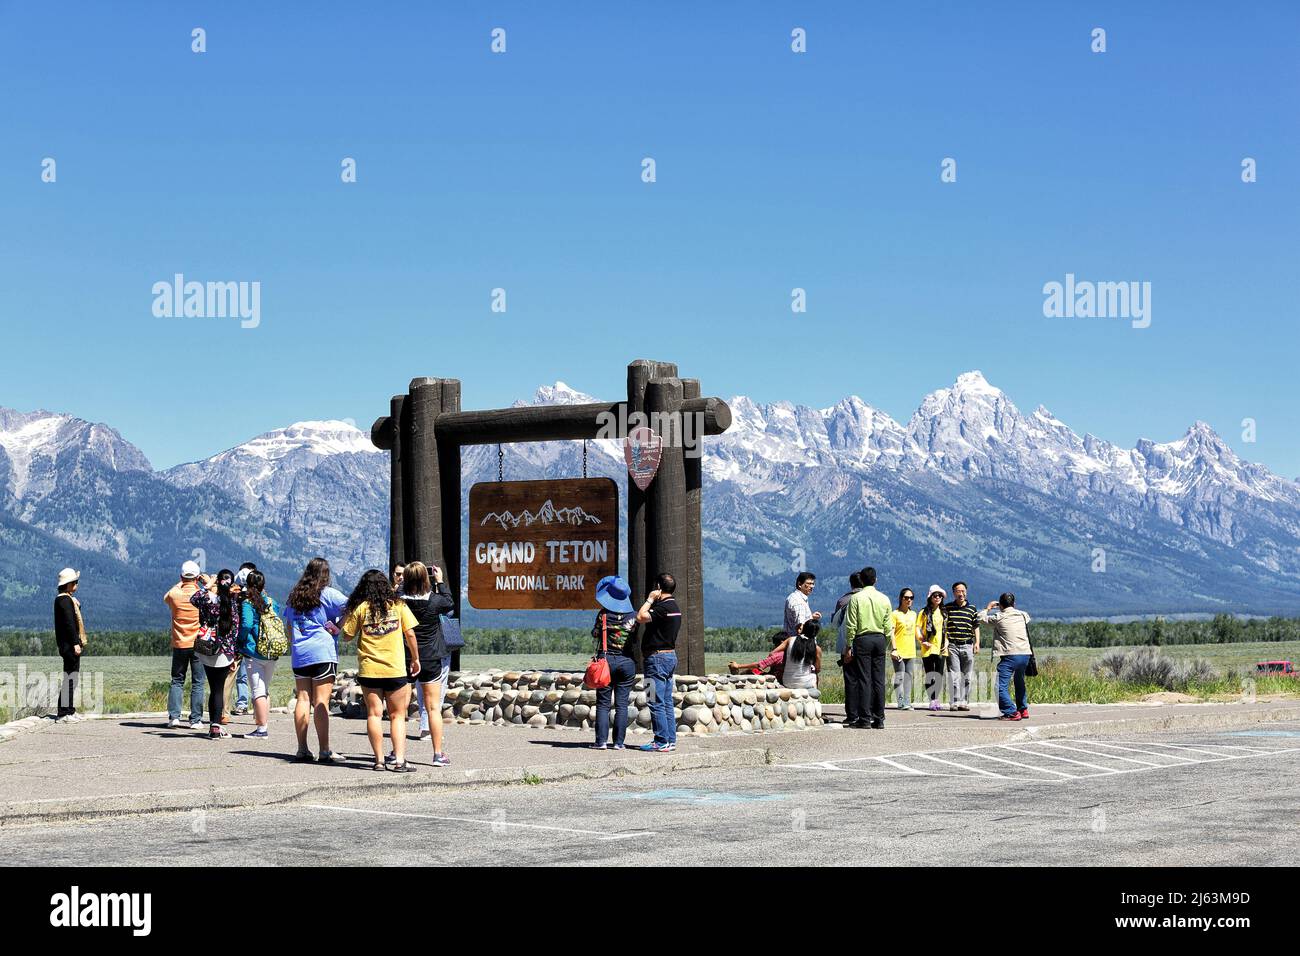 A group of Asian tourists taking pictures in front of the entrance sign in Grand Teton National Park. Stock Photo